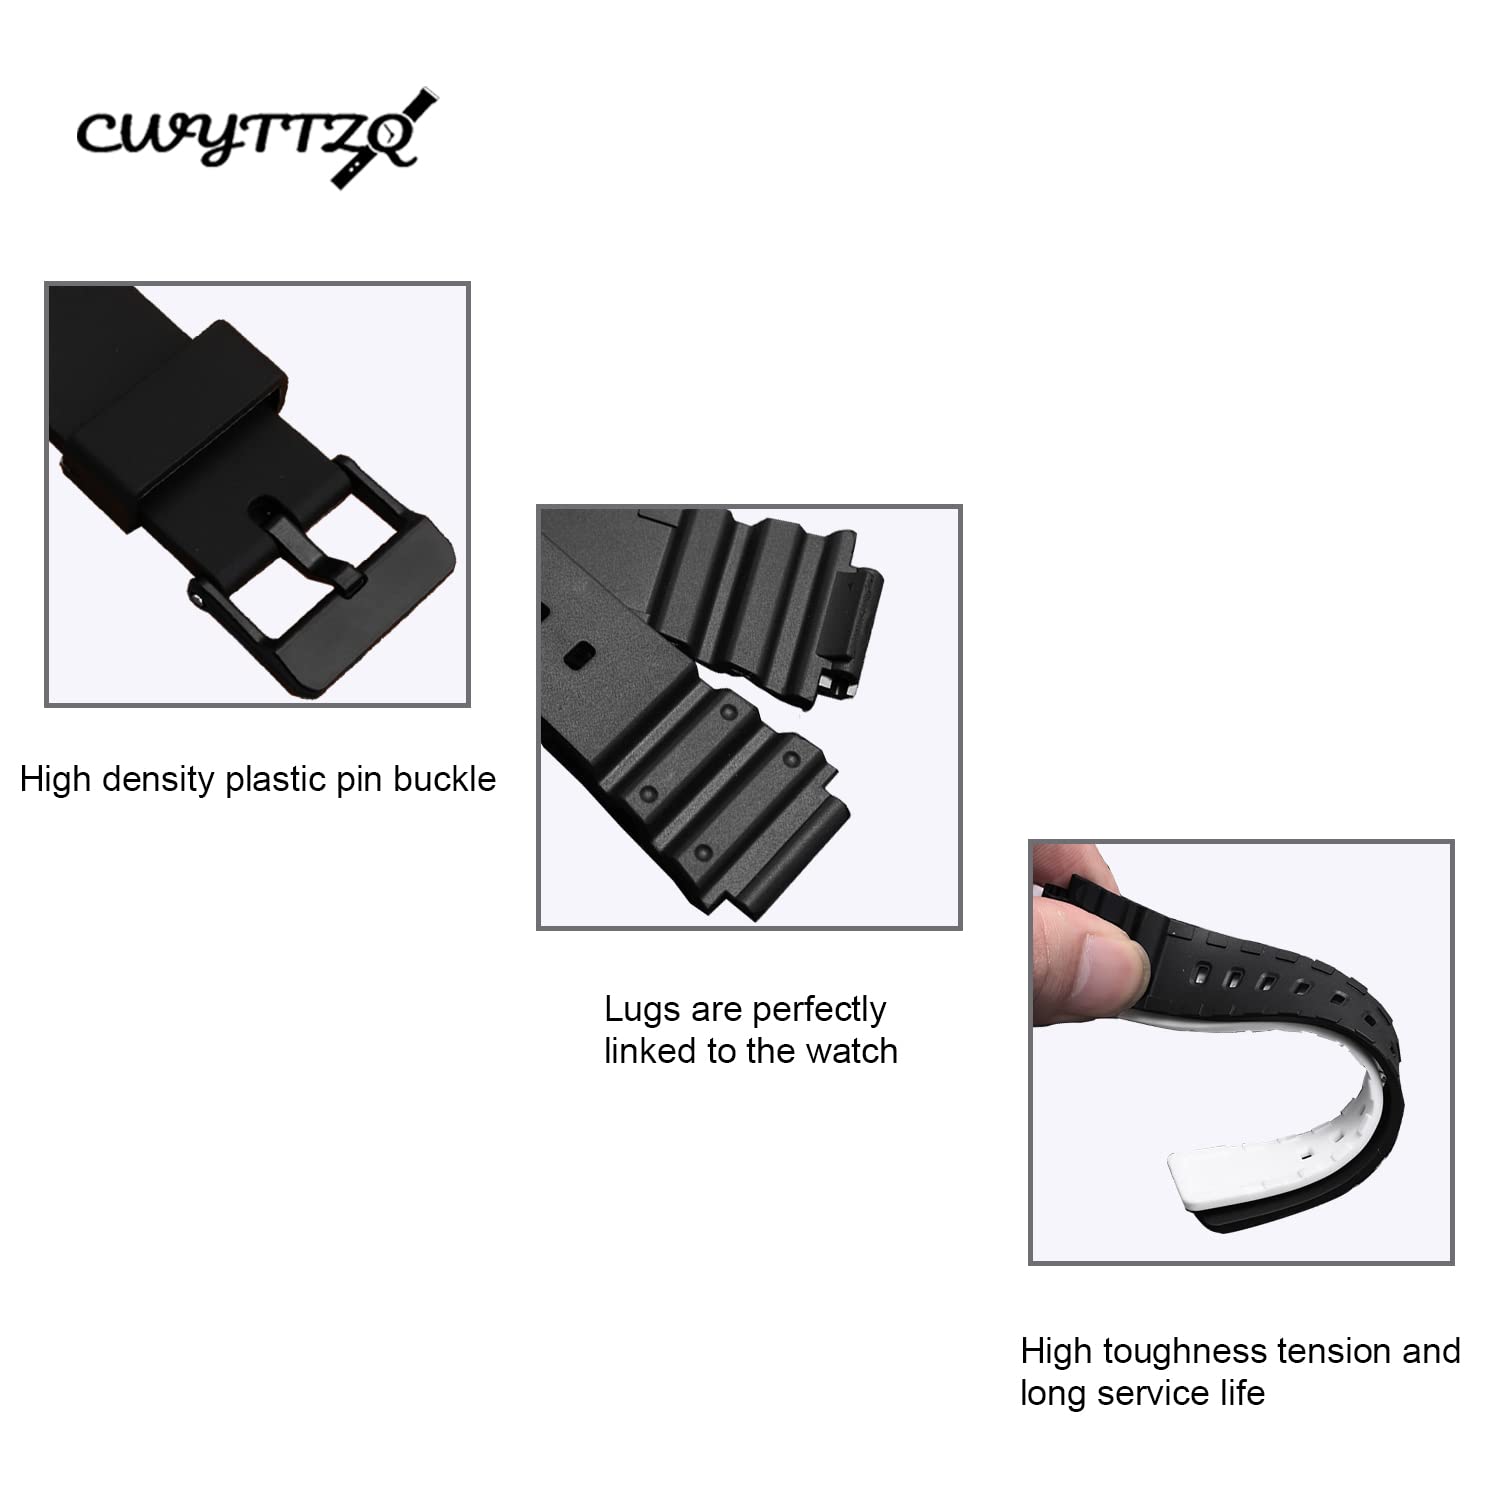 Cwyttzq Watchband Resin Silicone Rubber Band Men Sports Strap For CASIO MRW-200H/S300H/W-800 Replace 18mm Electronic Wristwatch Belt Watch Accessories